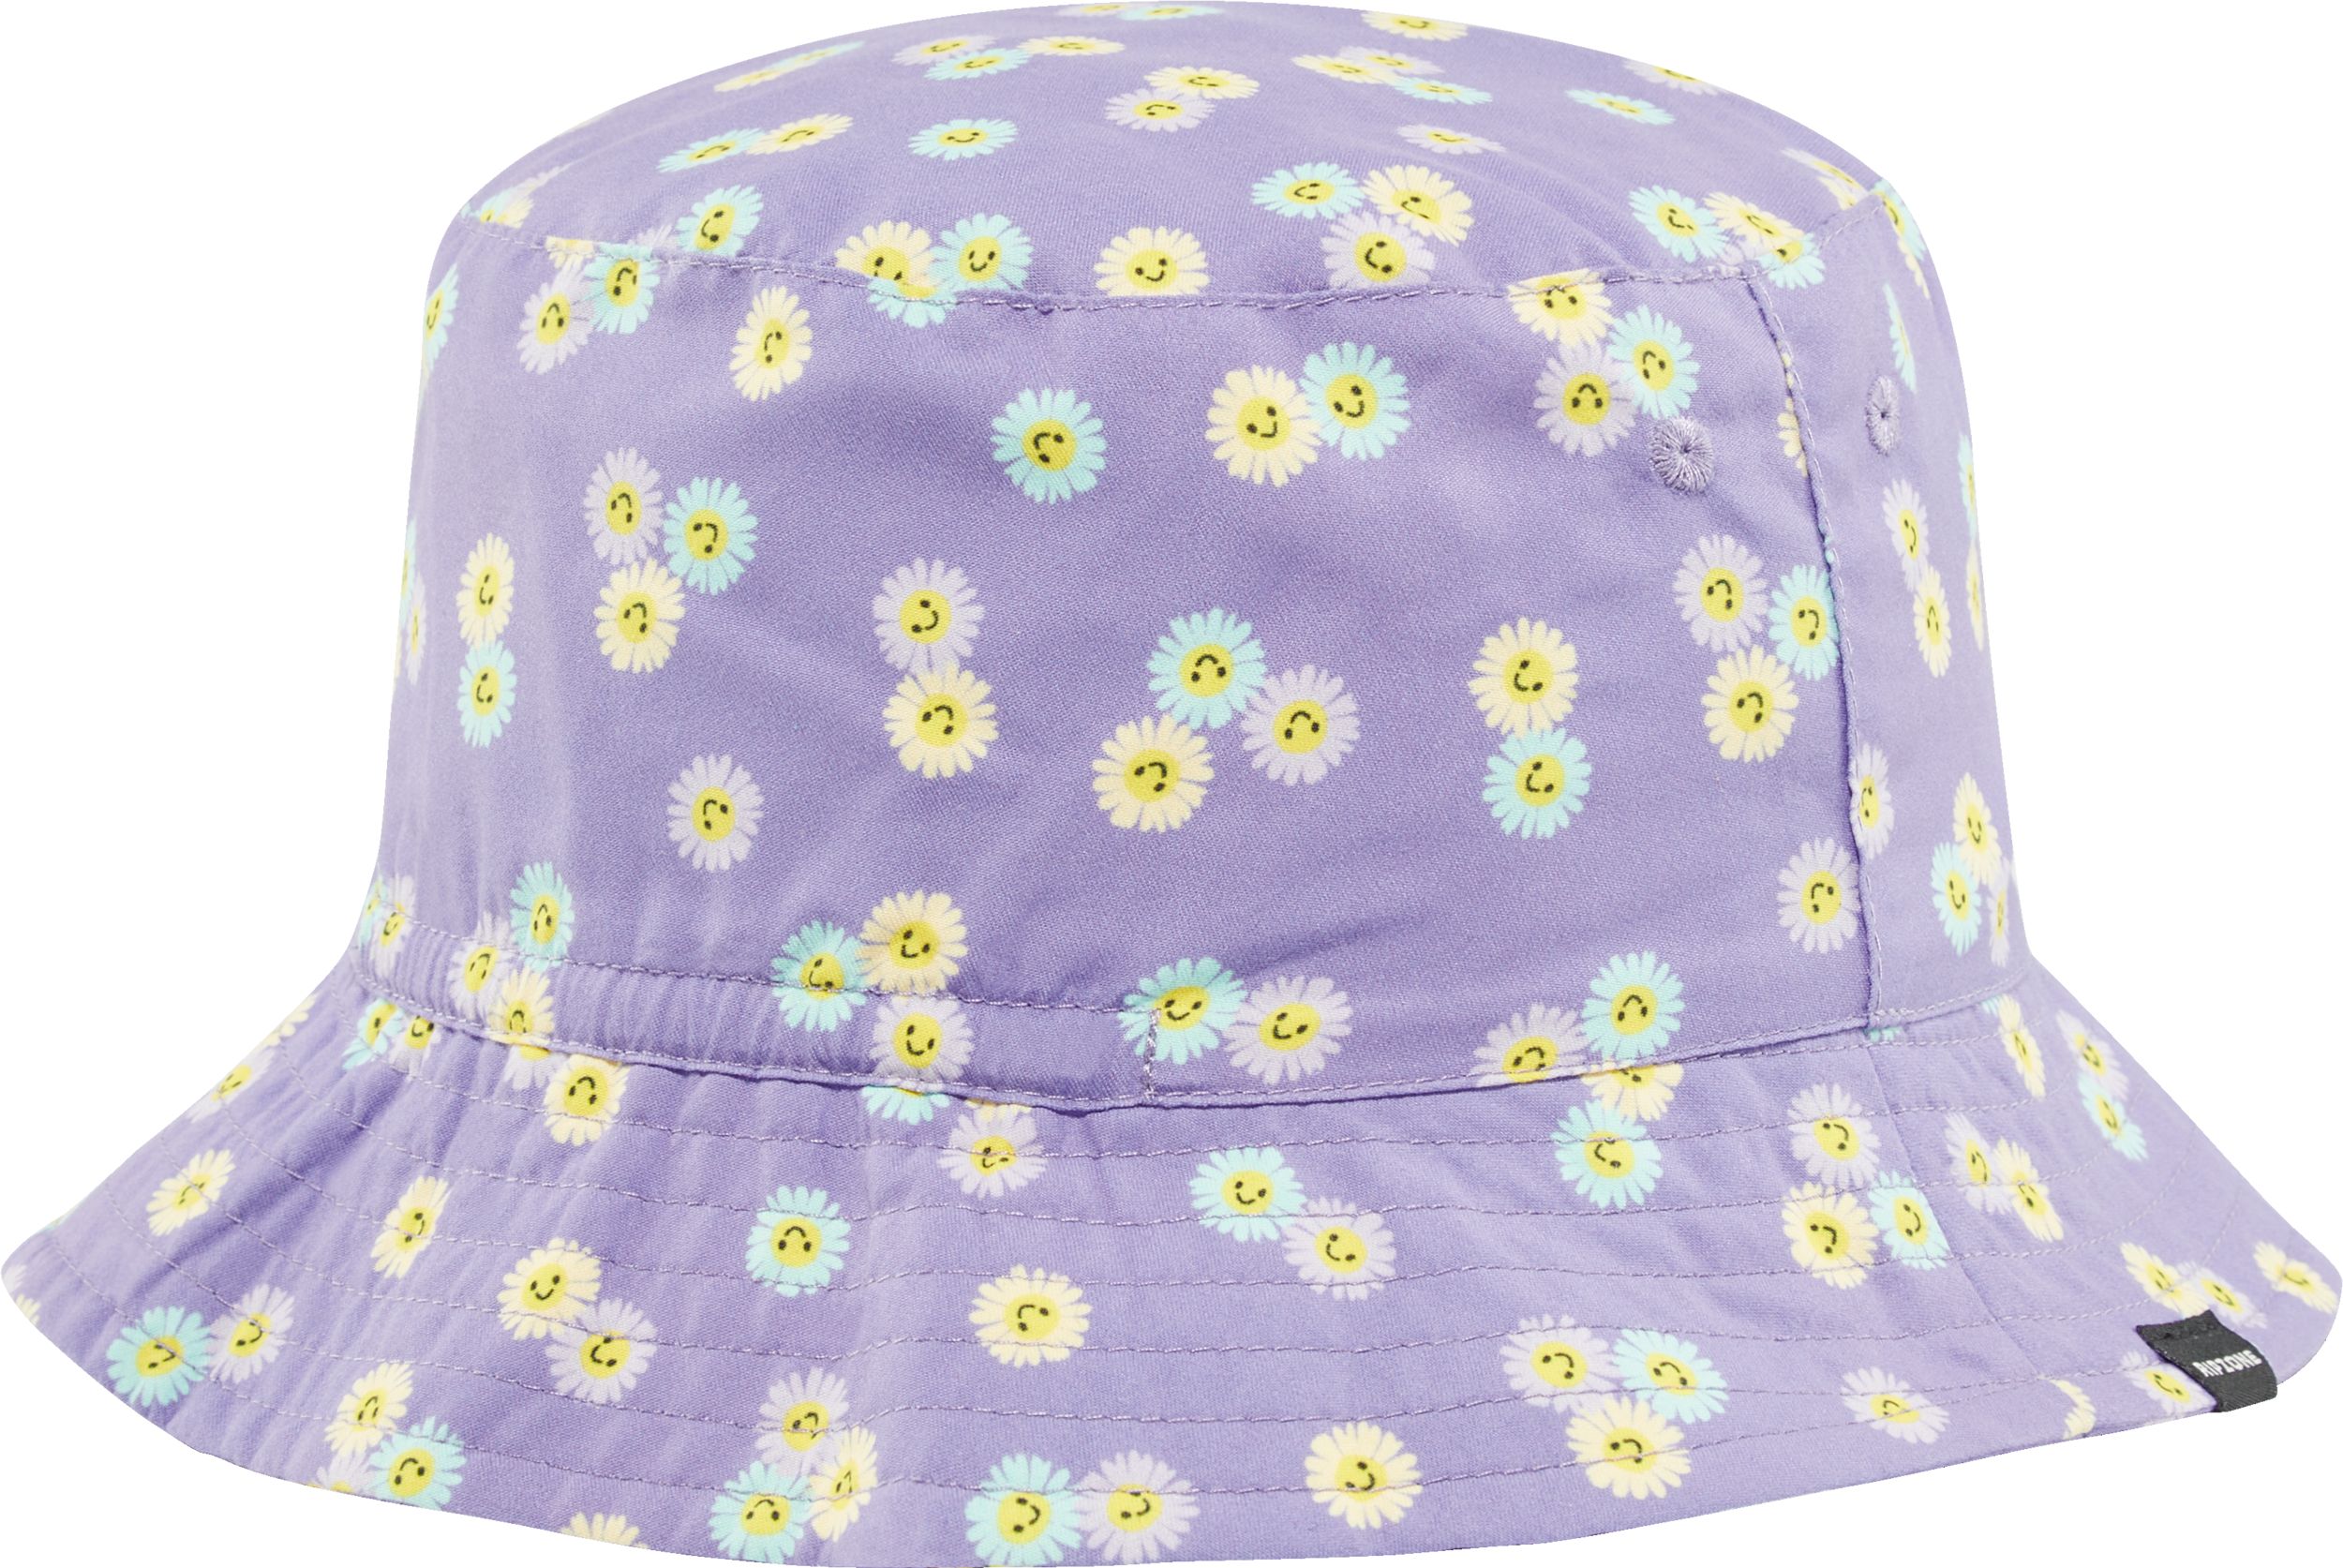 Ripzone Toddler Boys' Gracie All Over Print Bucket Hat